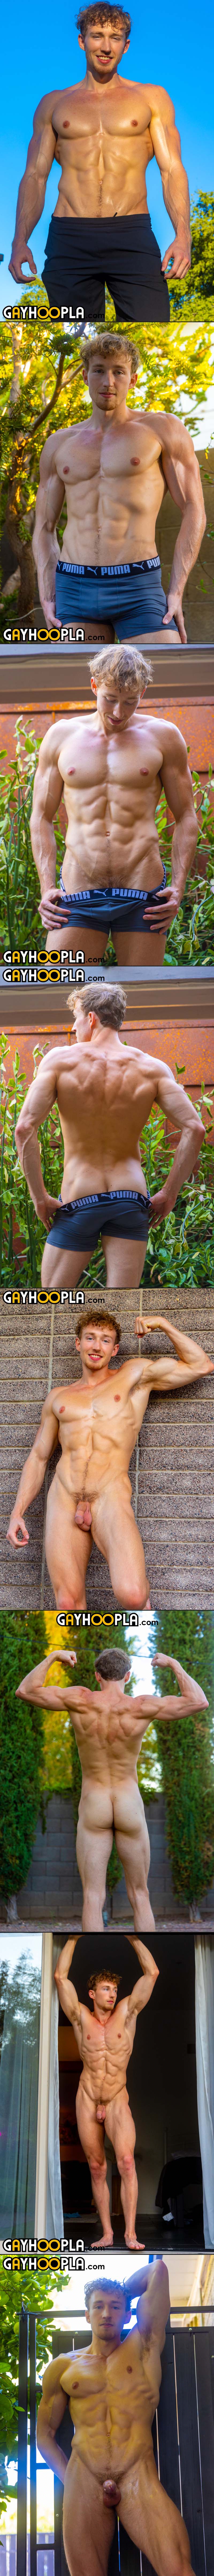 Kodi Kaladin [After Hours Solo Session With Shredded Codi!] at GayHoopla